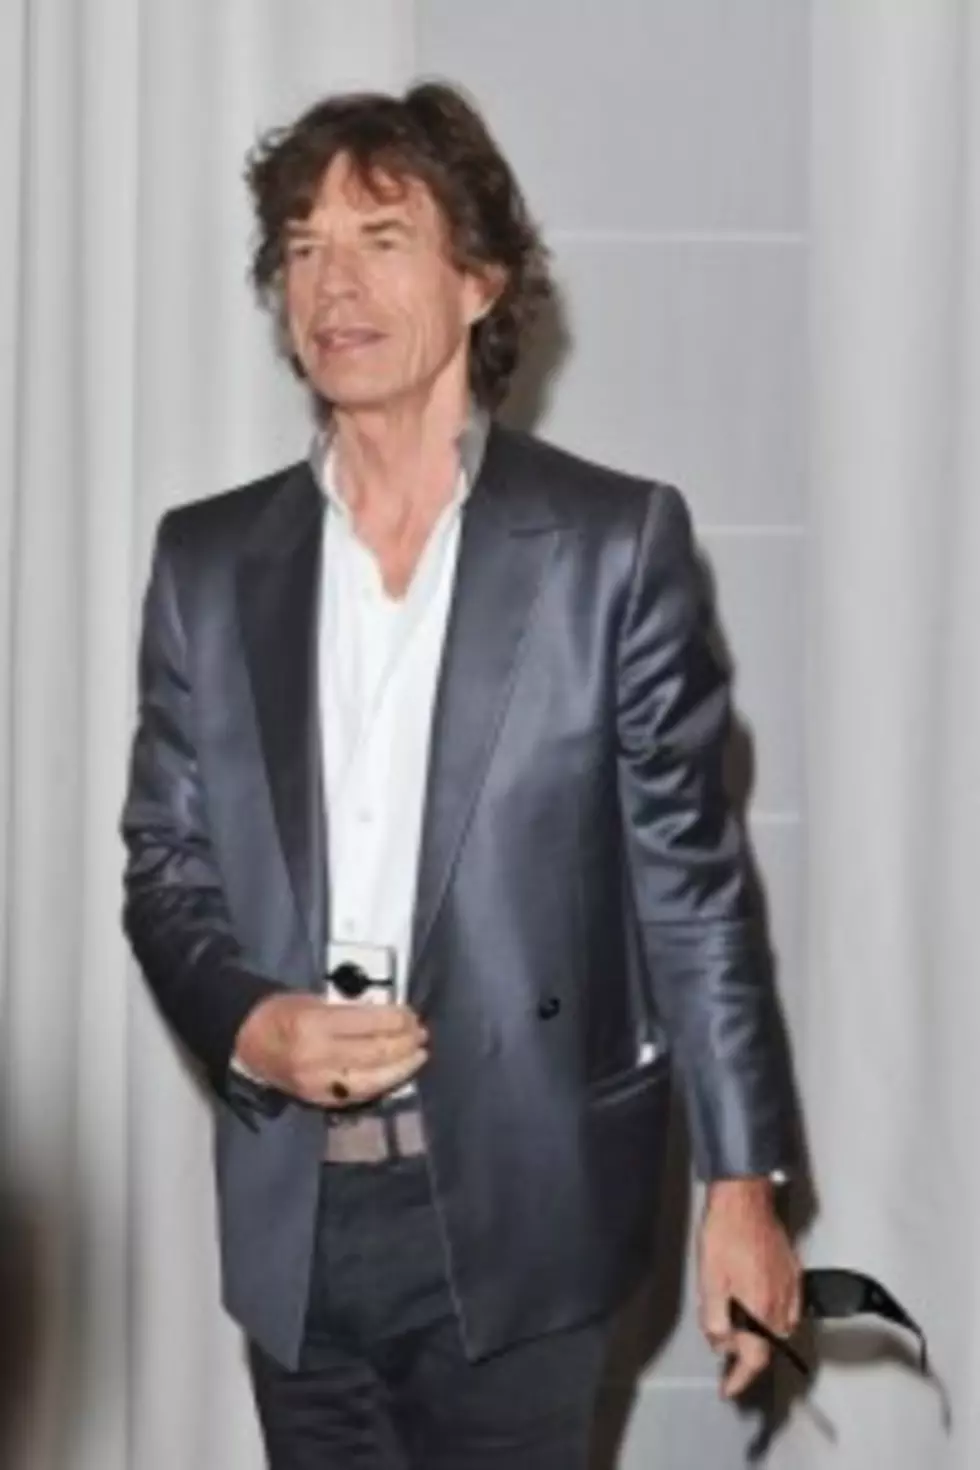 Mick Jagger is a Facebook Junkie, Who Would Have Guessed